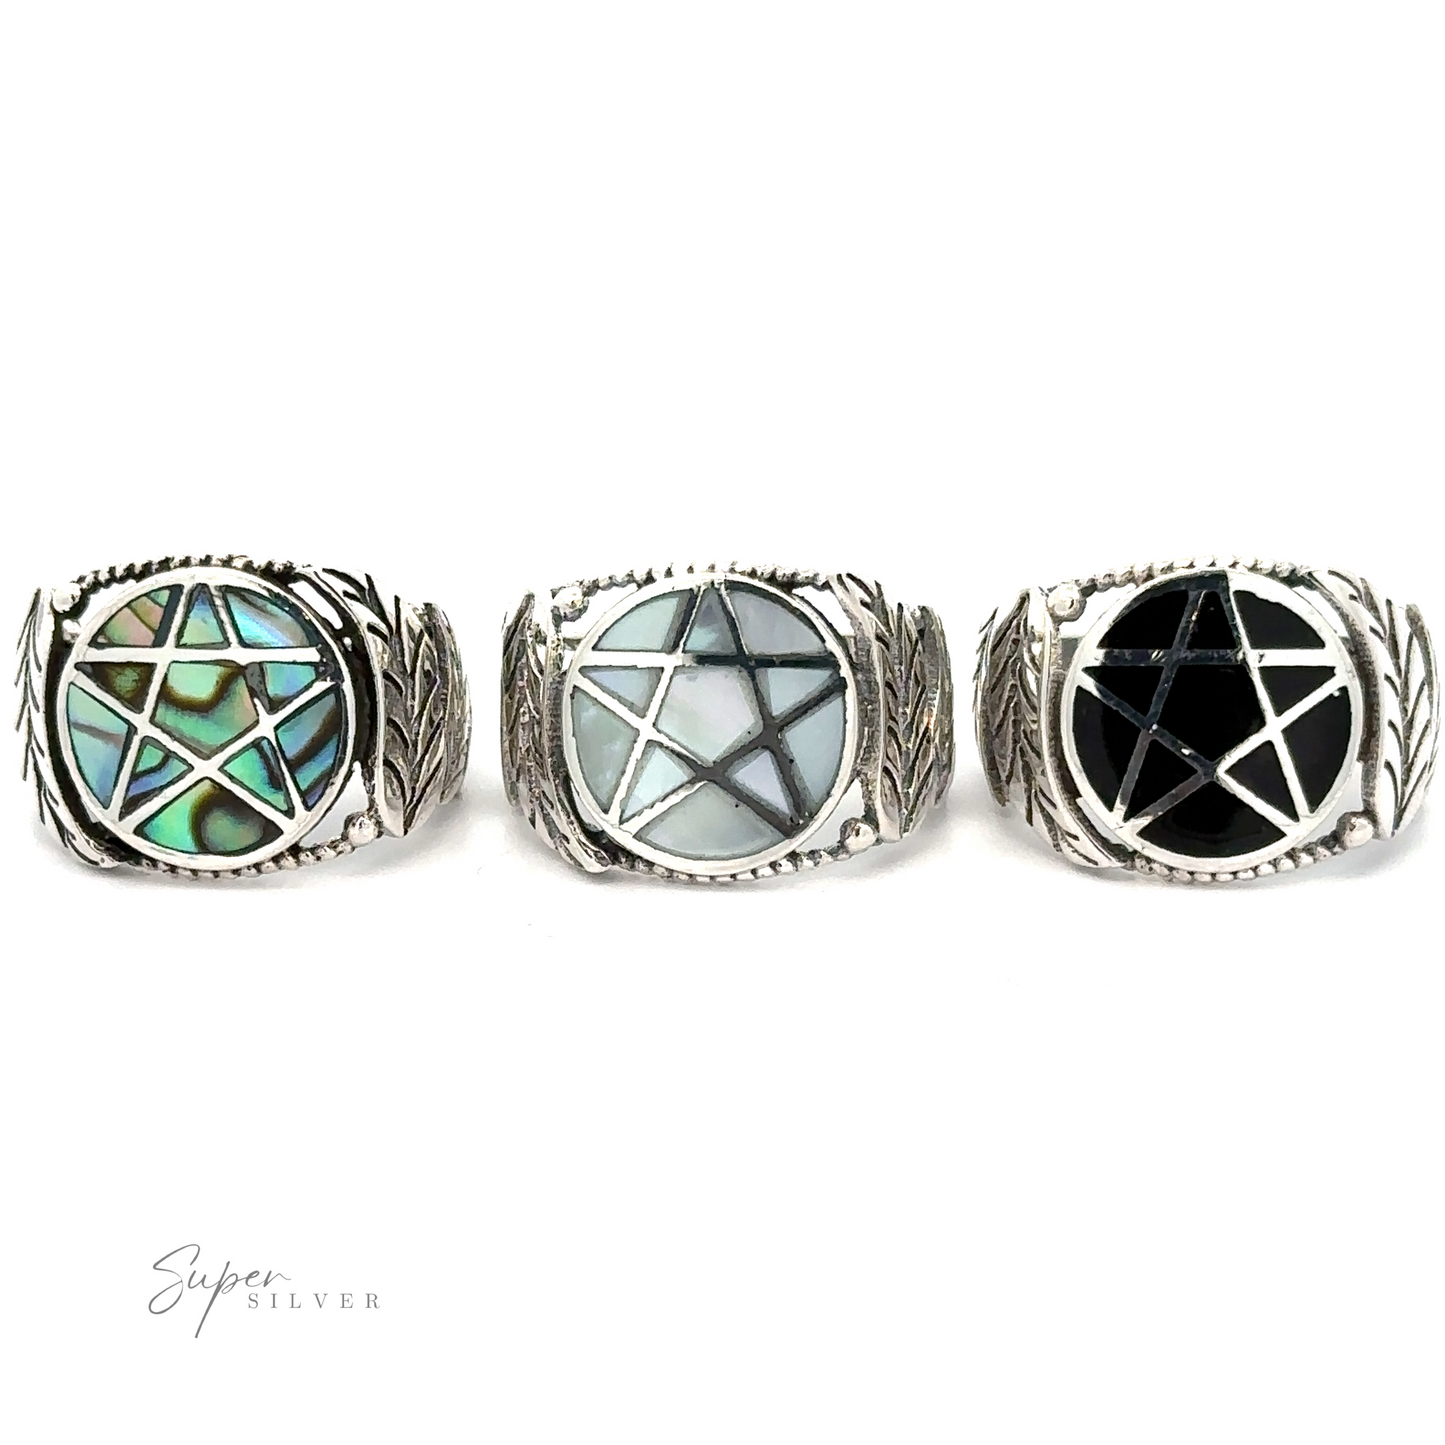 Three sterling silver rings with geometric gemstone inlays on a white background, including a Pentagram Ring with Inlaid Stones.